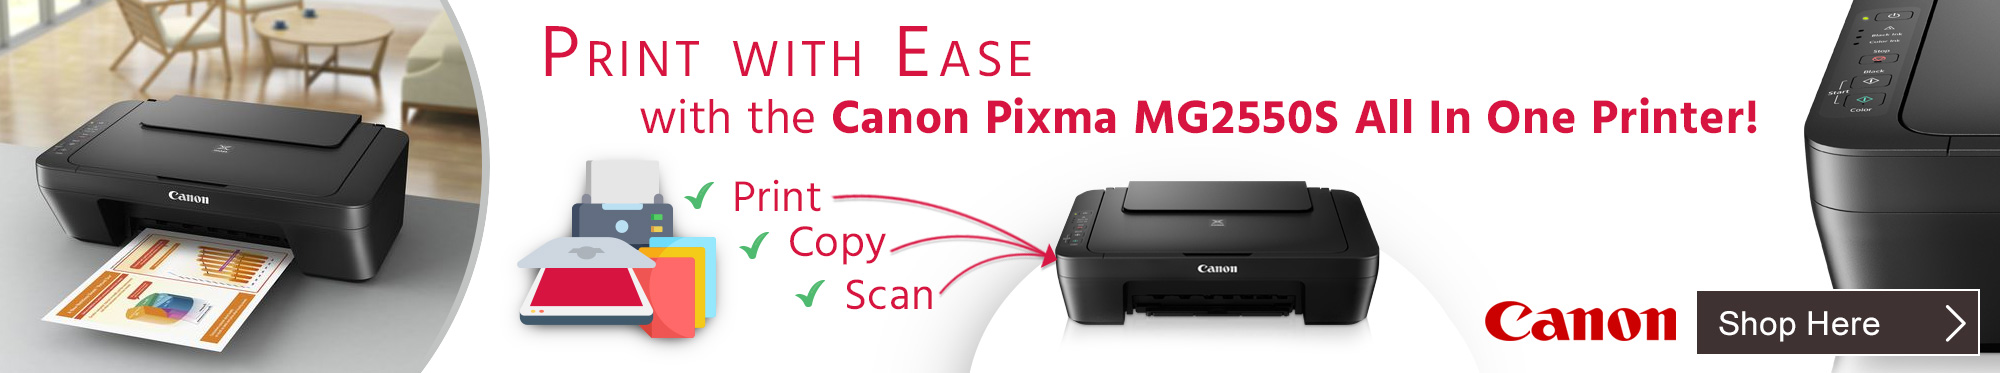 Print With Ease With The Canon Pixma MG2550S All In One Printer